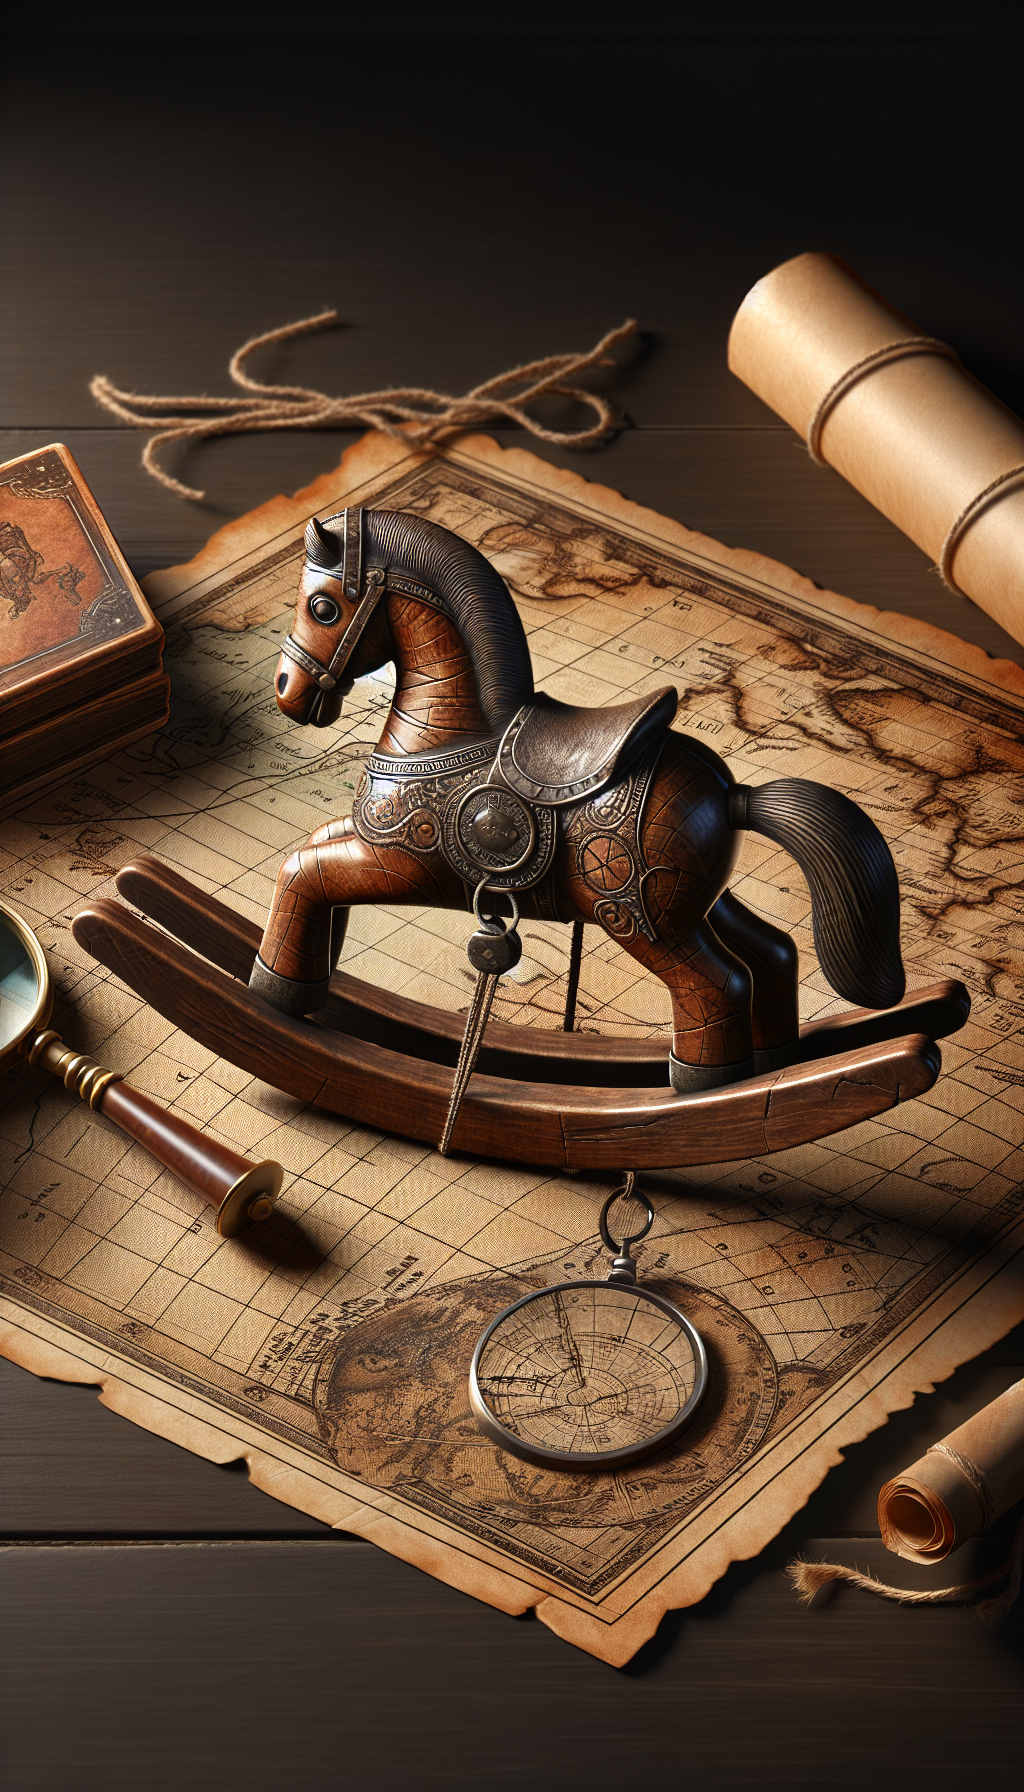 An antique rocking horse stands atop an aged treasure map with magnifying glass and scroll. Fine cracks and wood grain detail highlight its venerable age while a shimmering tag dangles, showing a hefty valuation. Illustration styles blend, with the horse rendered in realistic earthy tones and the map in vintage line art, hinting at the mystery of its origins.